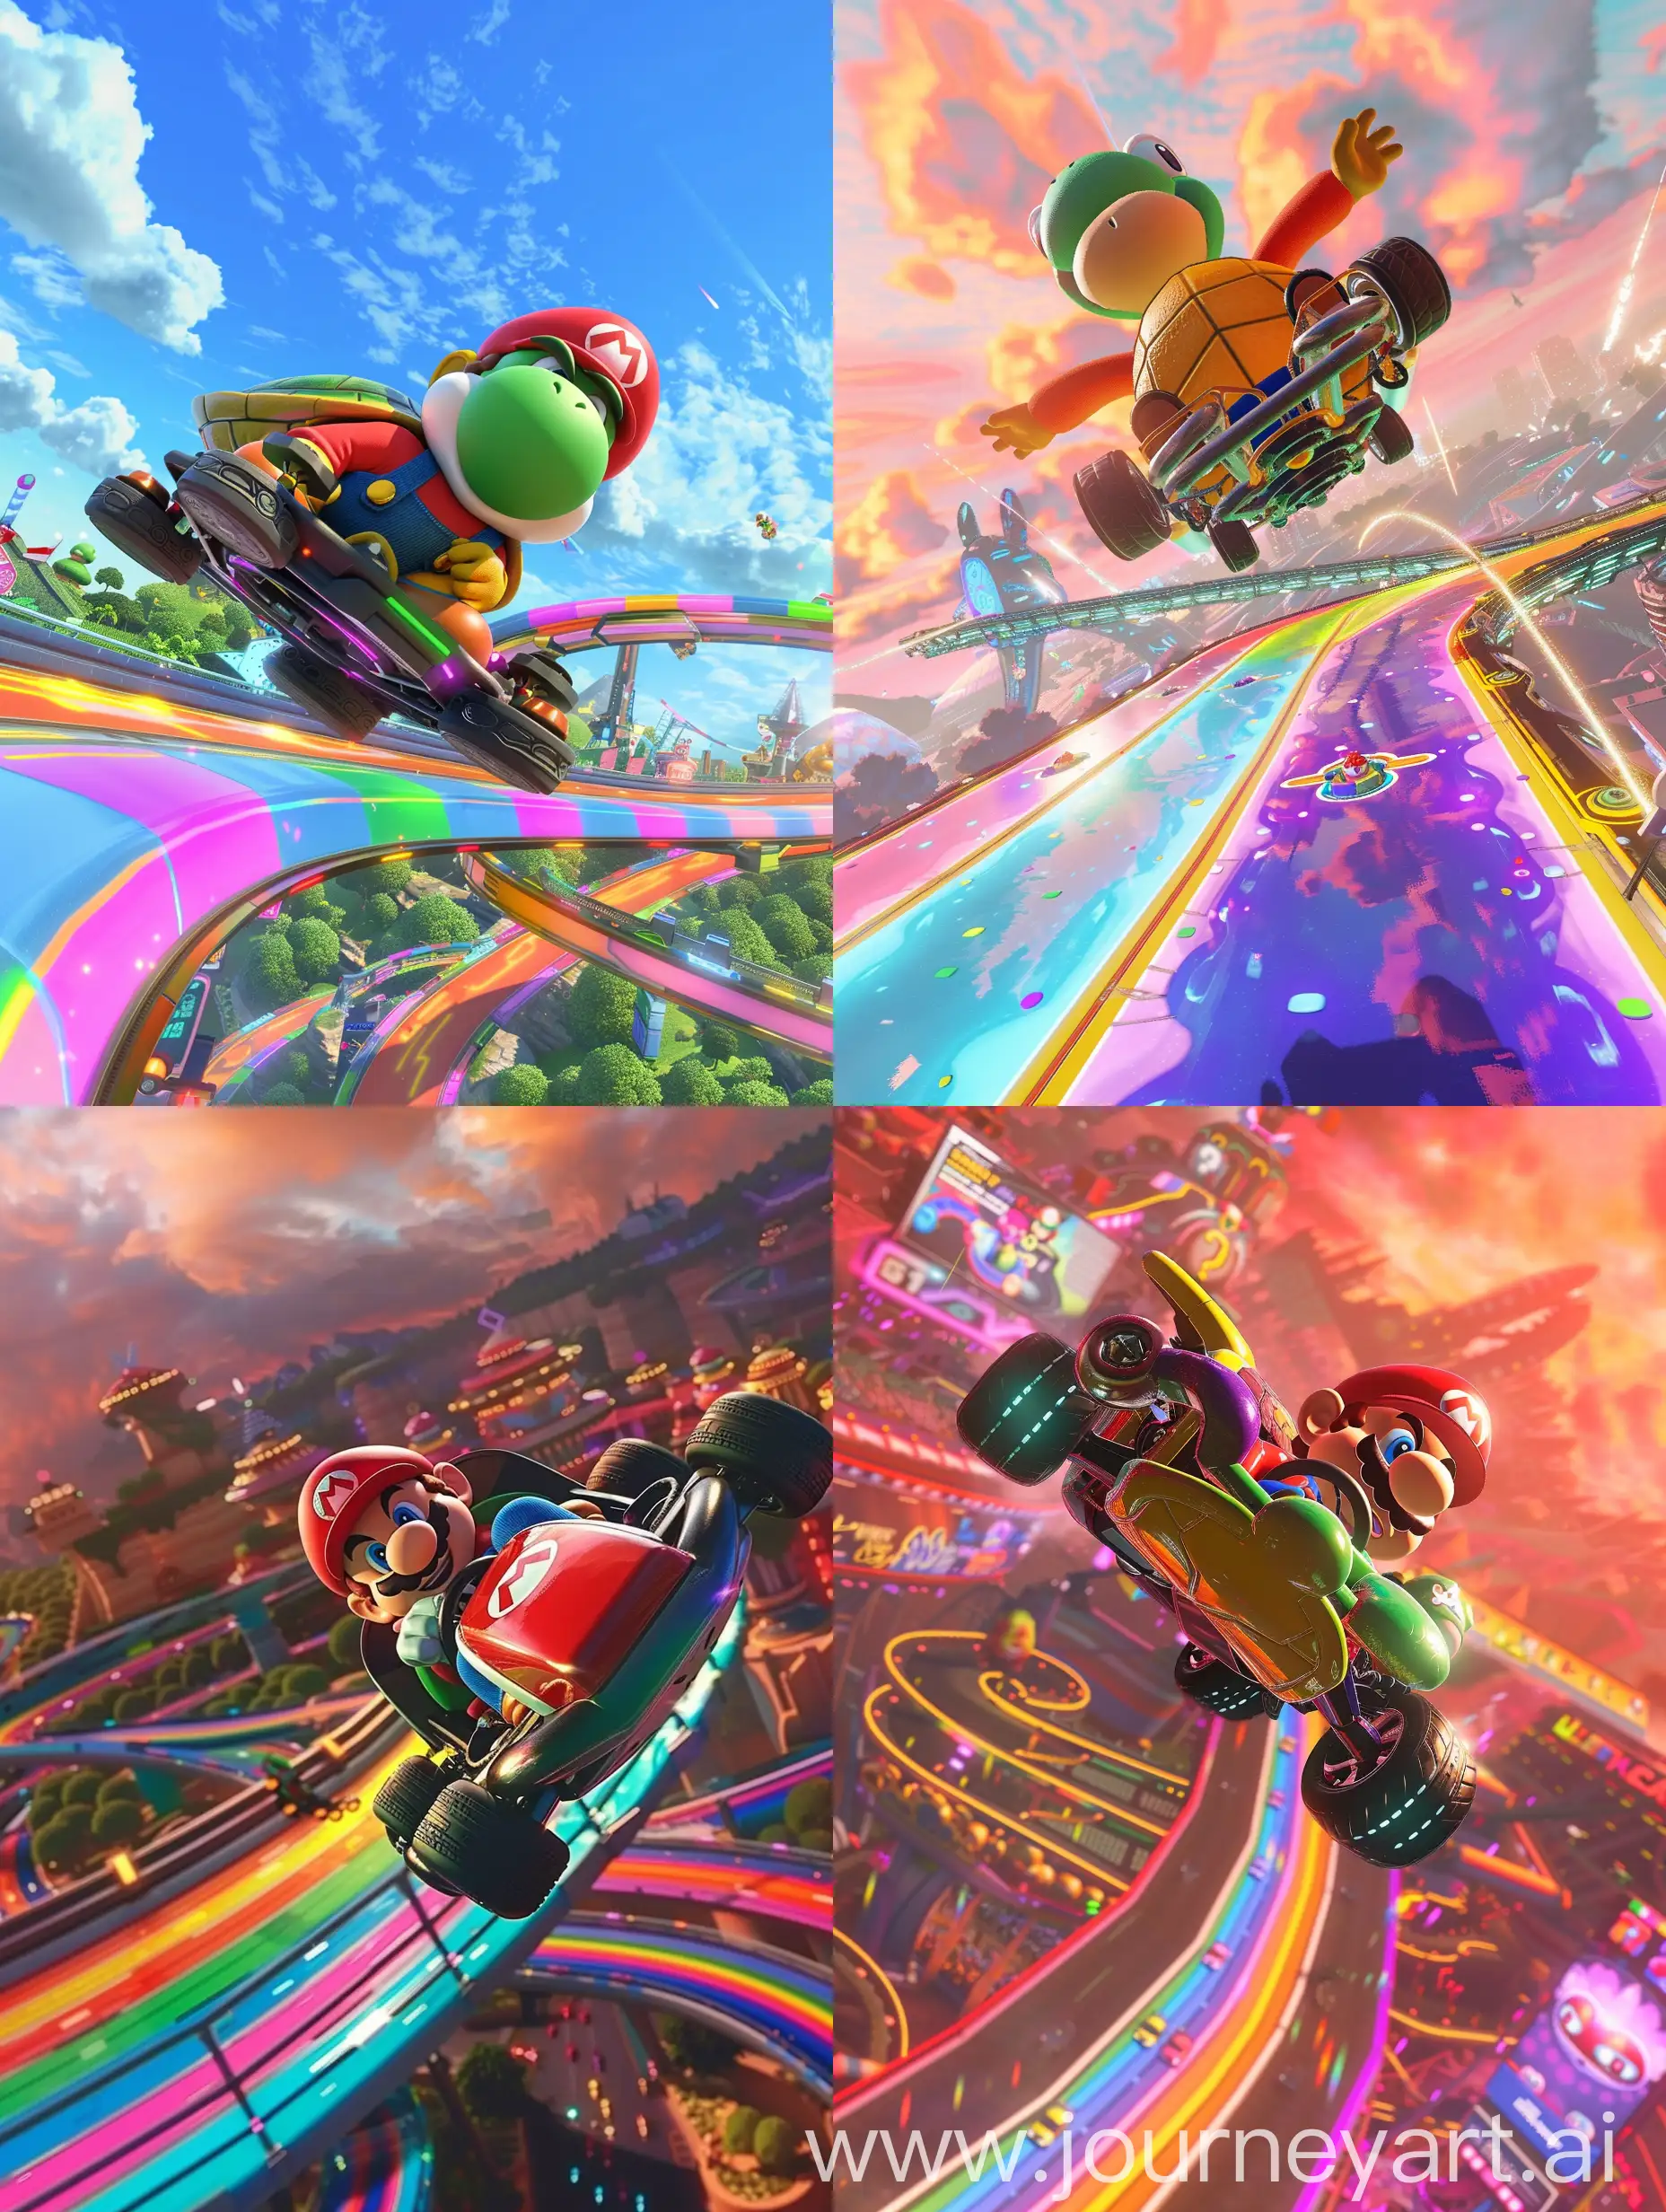 Mario Kart 8 Deluxe: A multi-colored turtle-shaped kart soaring over a futuristic racetrack with Rainbow Road in the background.
